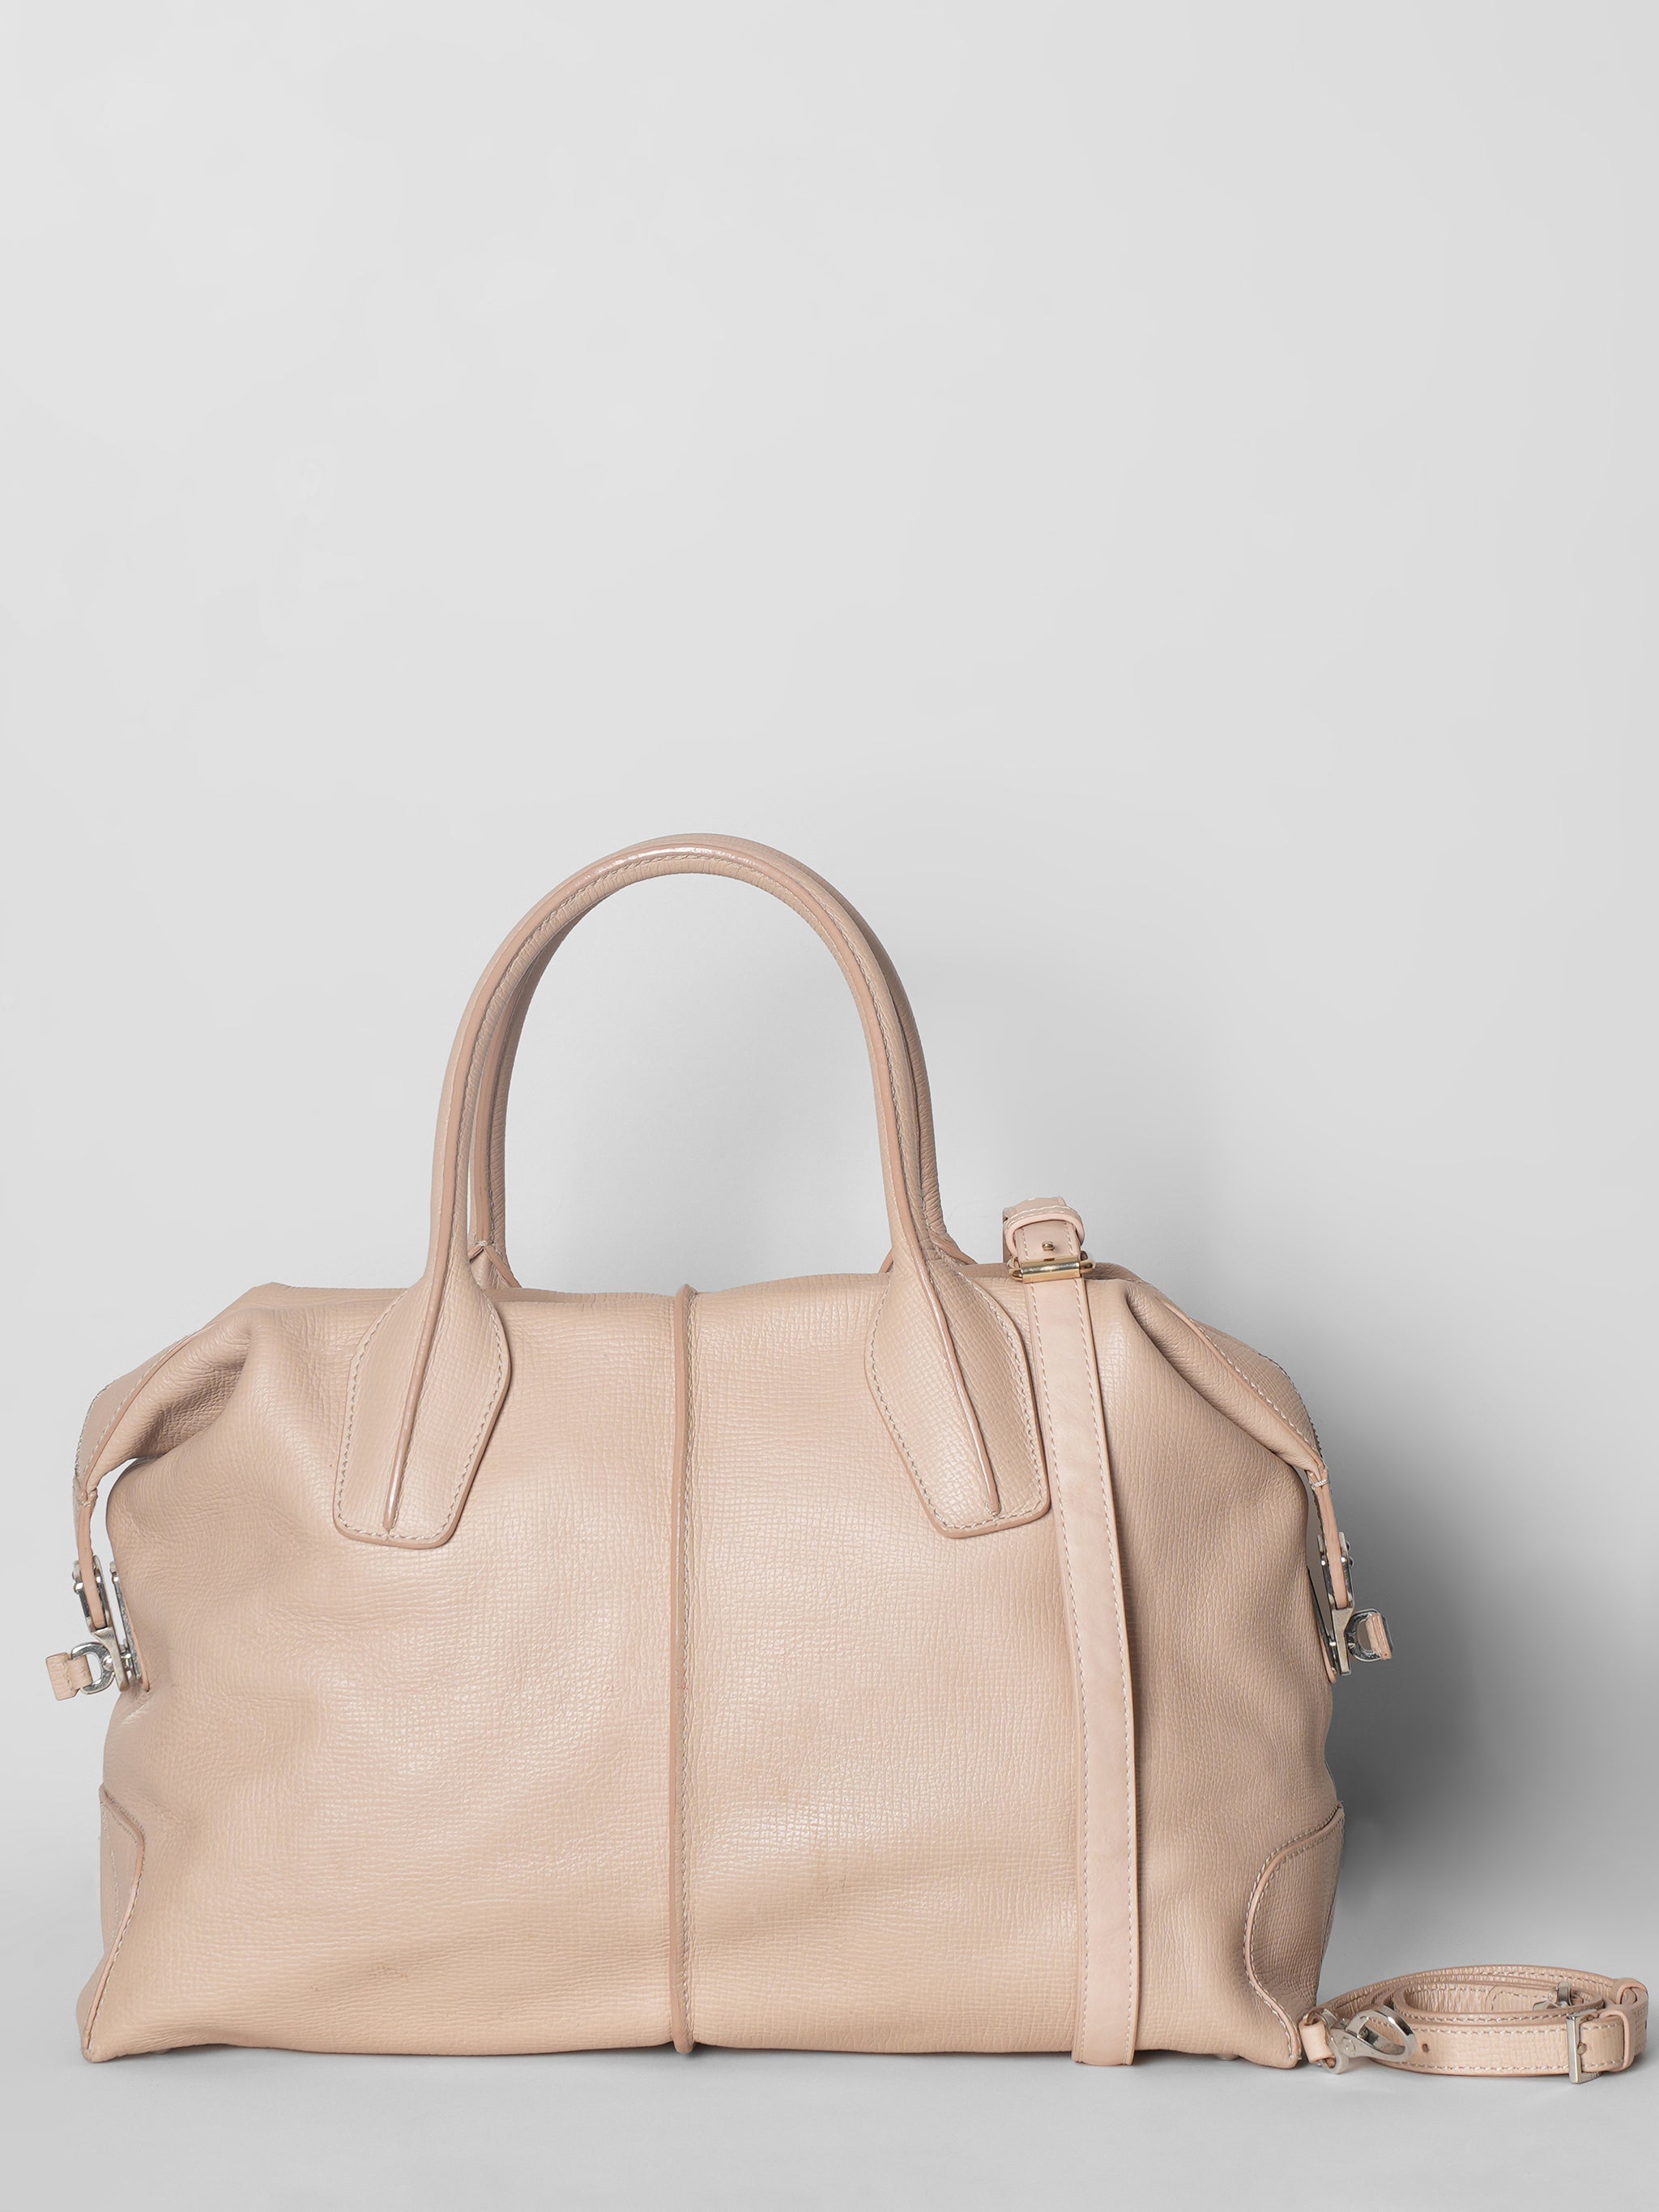 Tods Genuine Leather Bag